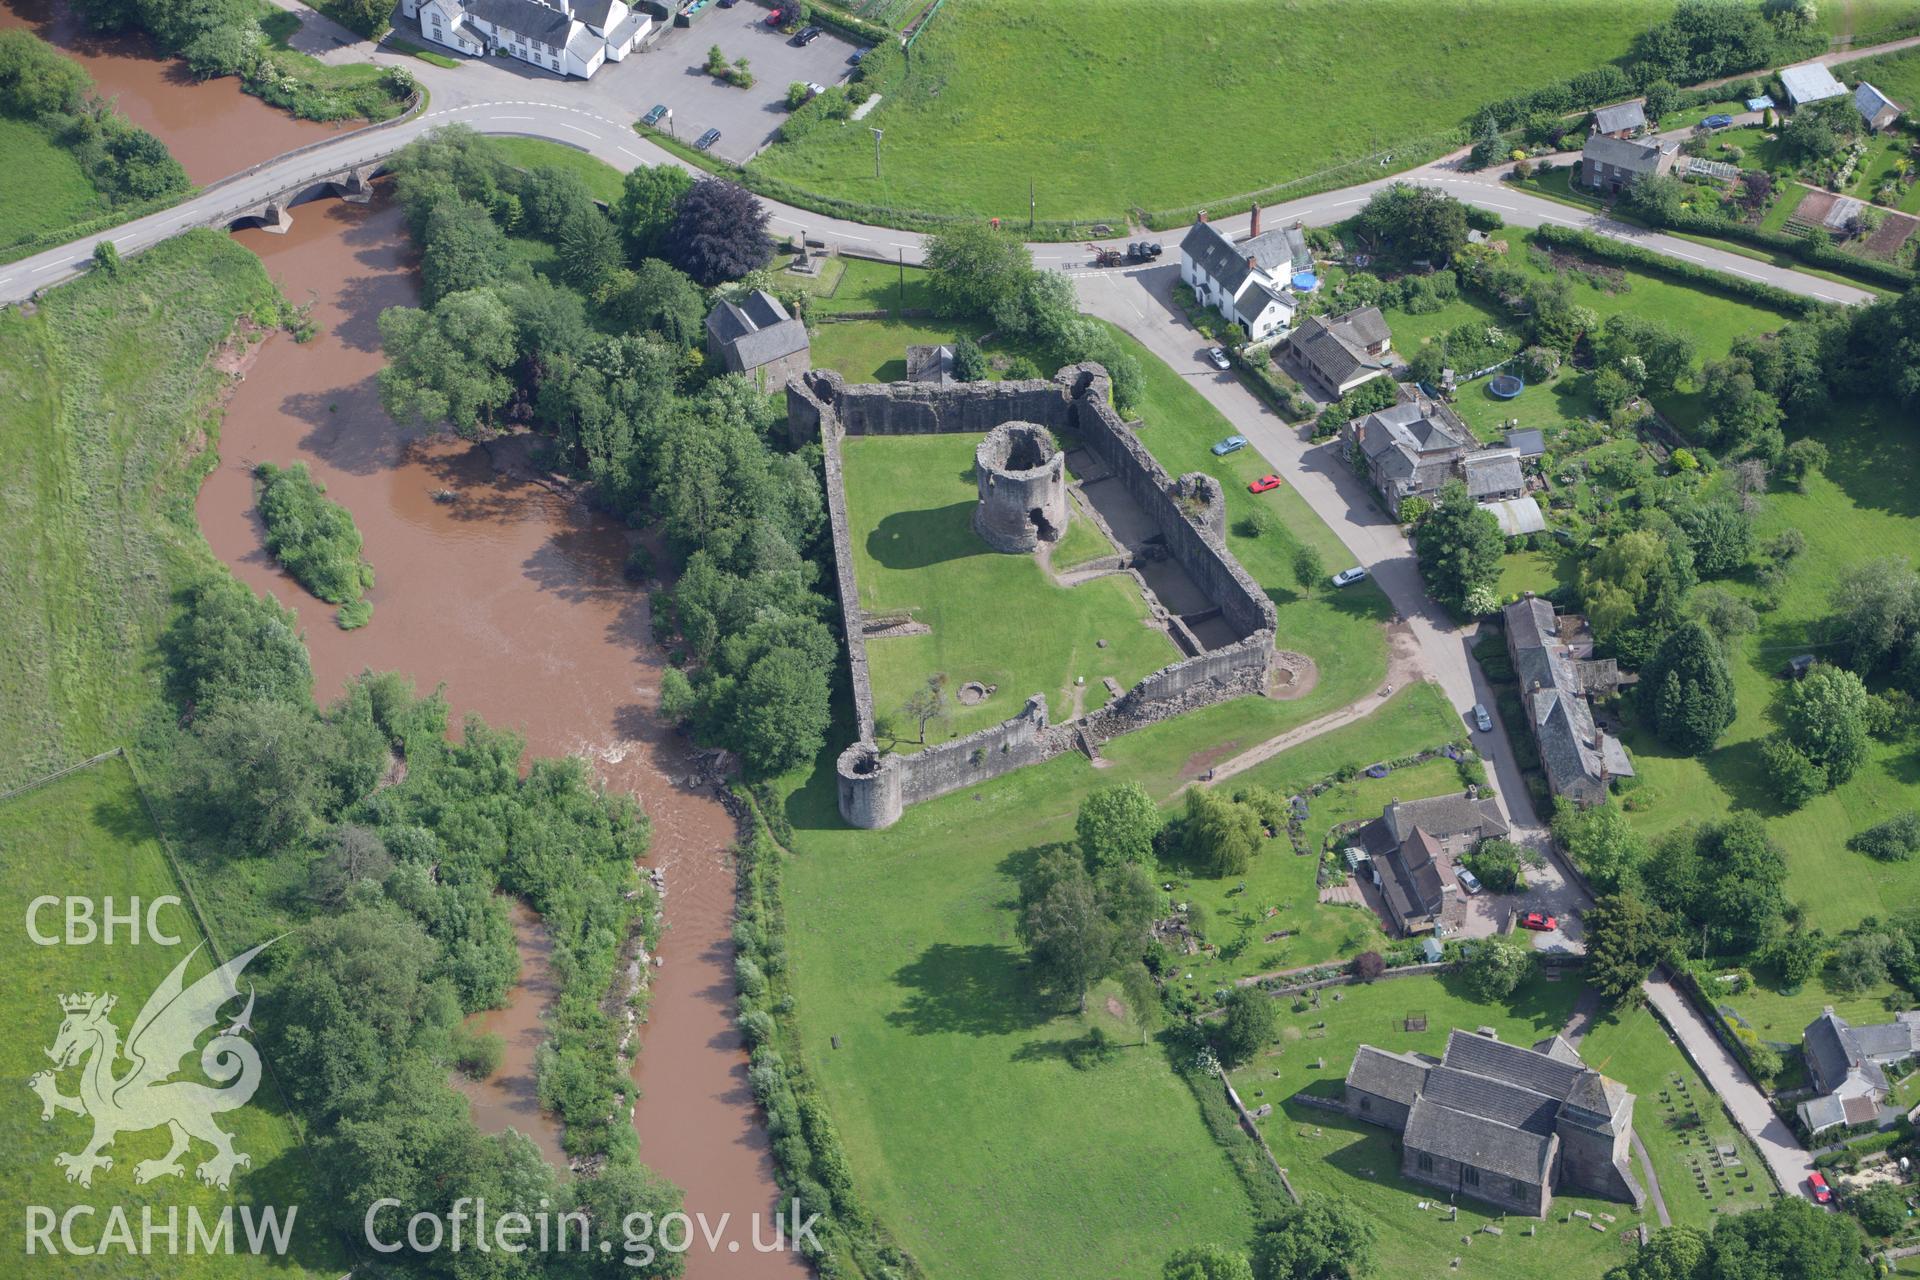 RCAHMW colour oblique aerial photograph of Skenfrith Castle. Taken on 11 June 2009 by Toby Driver